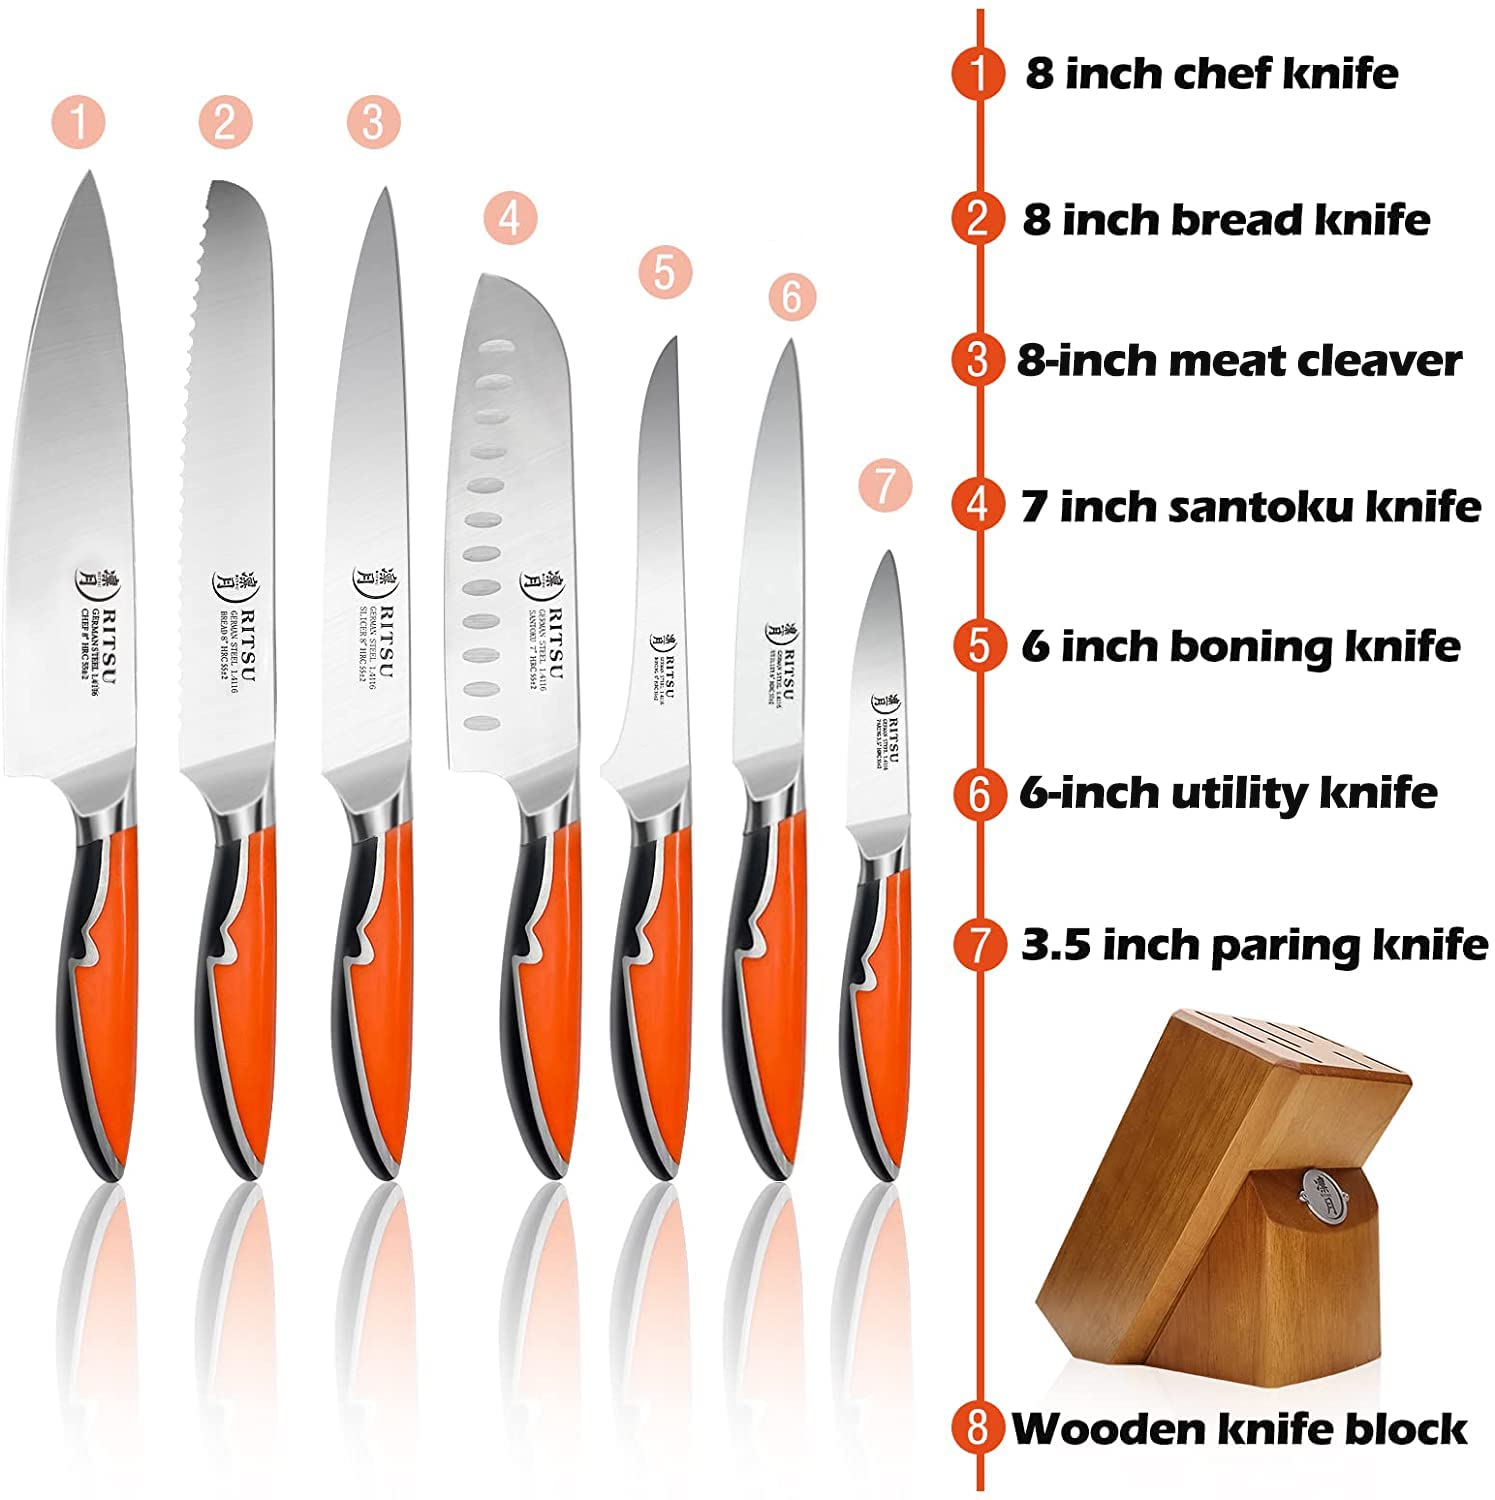 Kitchen Knife Set 8 Pieces RITSU High Carbon Stainless Steel Knife Set, With Solid Wood Chefs Knife Stand Super Sharp Two-Color Handle Chef Knife Set